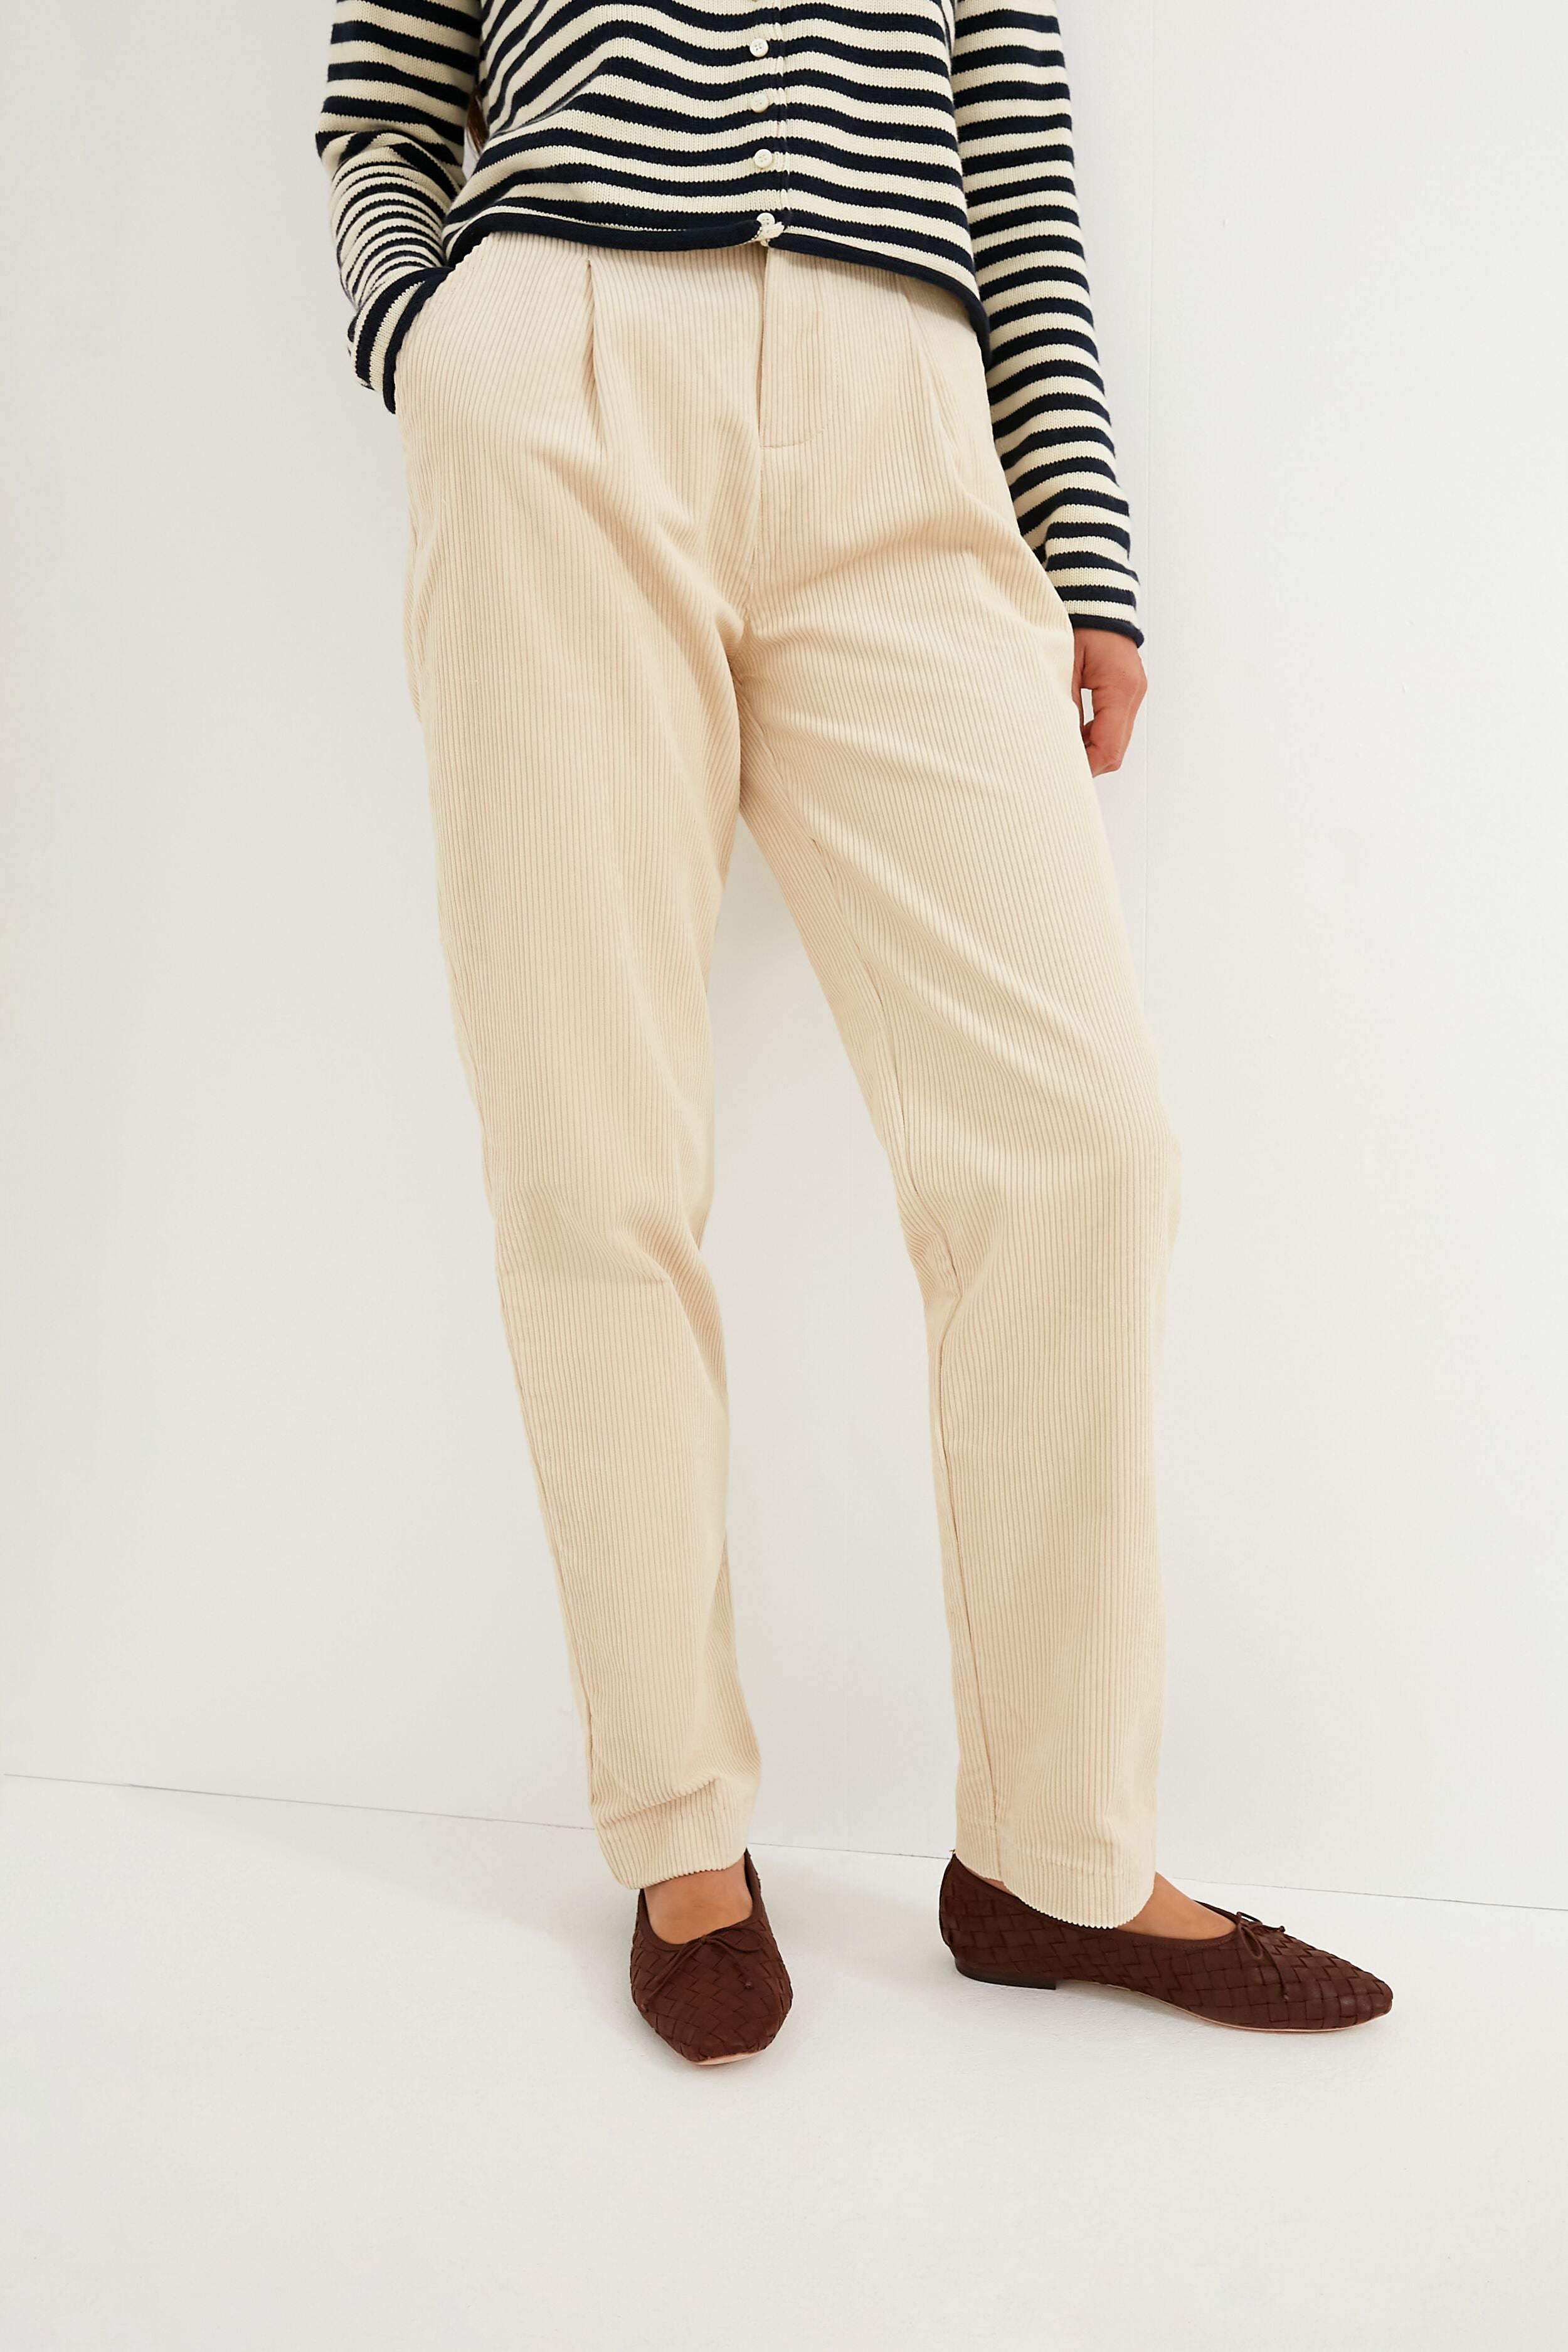 These Corduroy Pants Are a Travel Essential